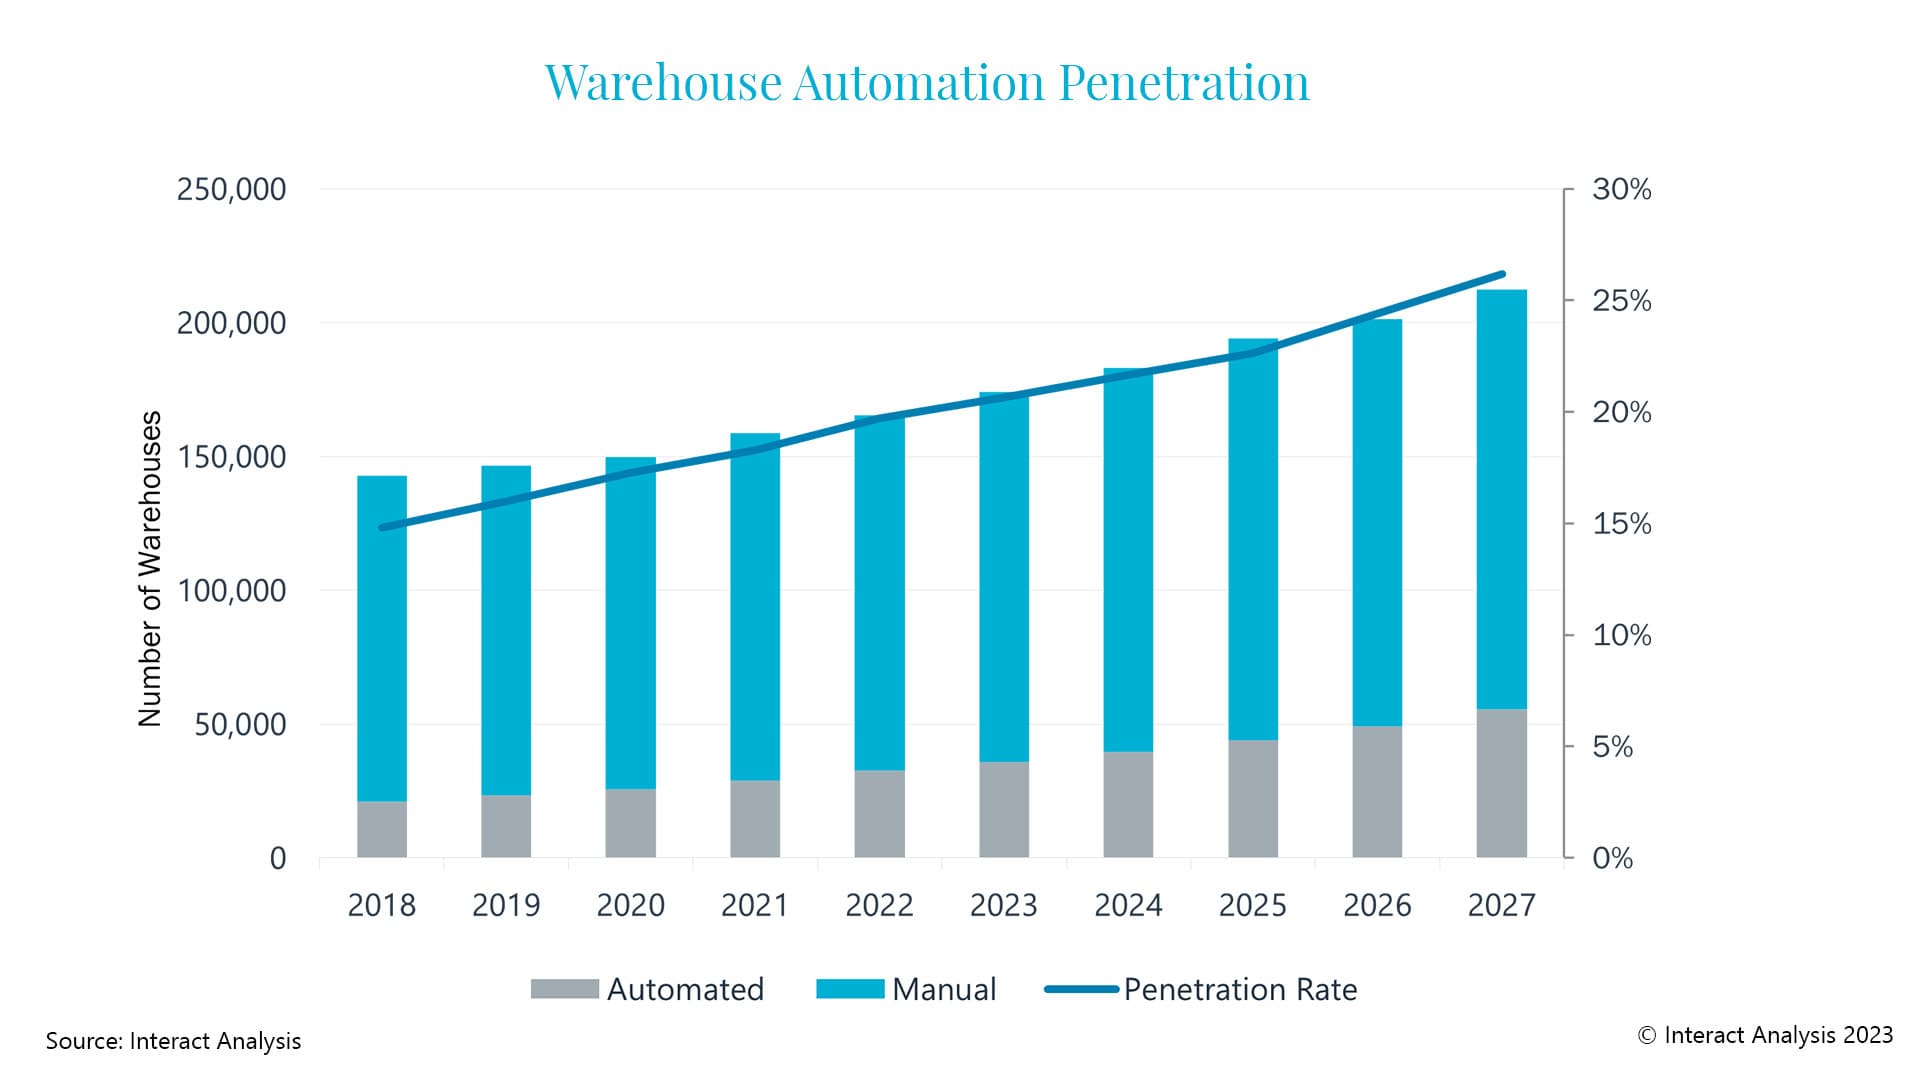 Warehouse Automation: 26% to be Automated by 2027